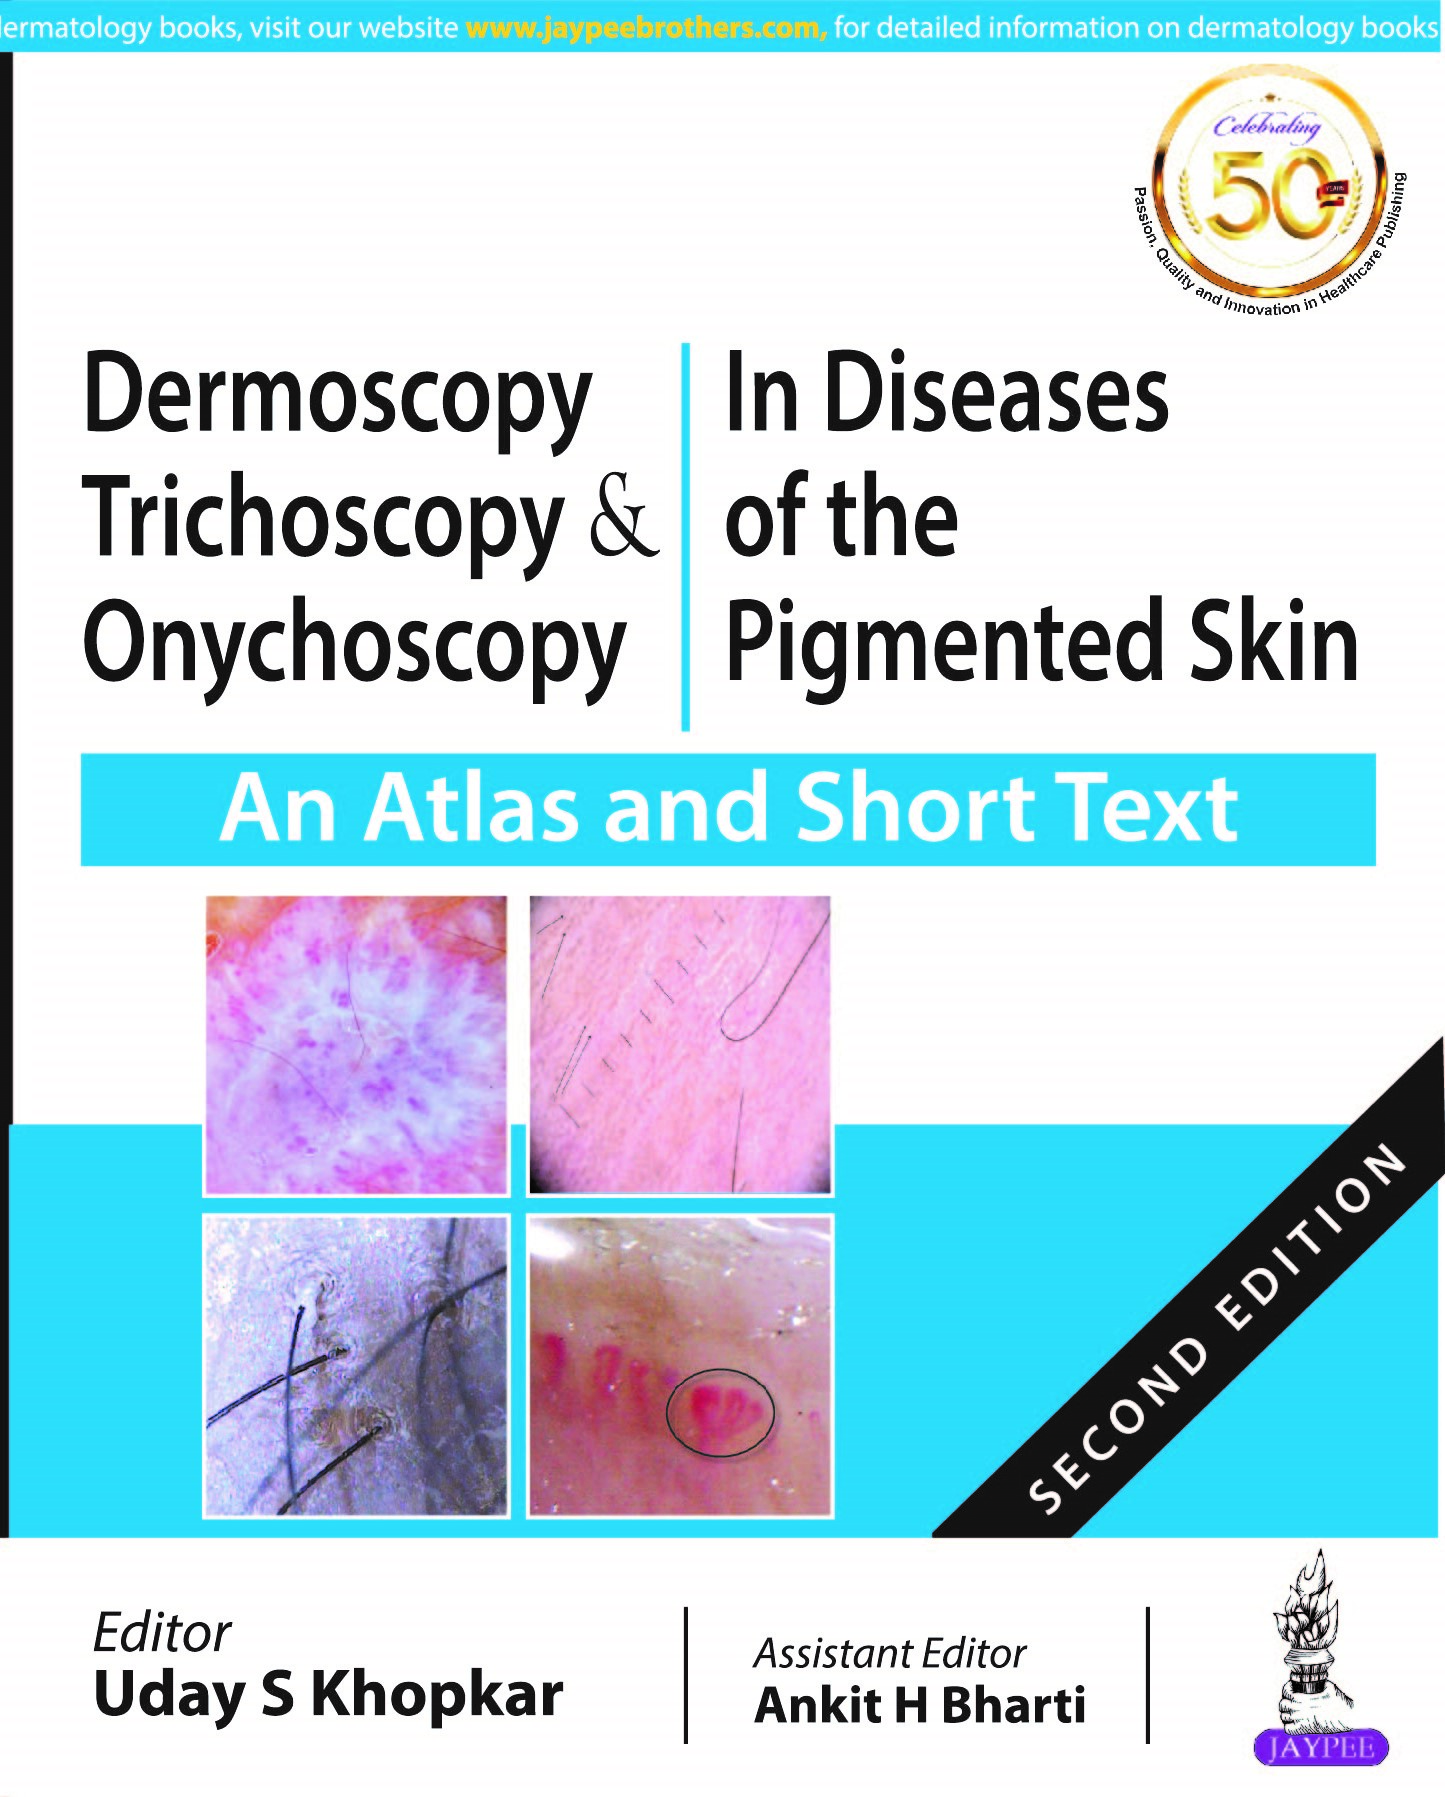 Dermoscopy, Trichoscopy & Onychoscopy In Diseases Of The Pigmented Skin An Atlas And Short Text